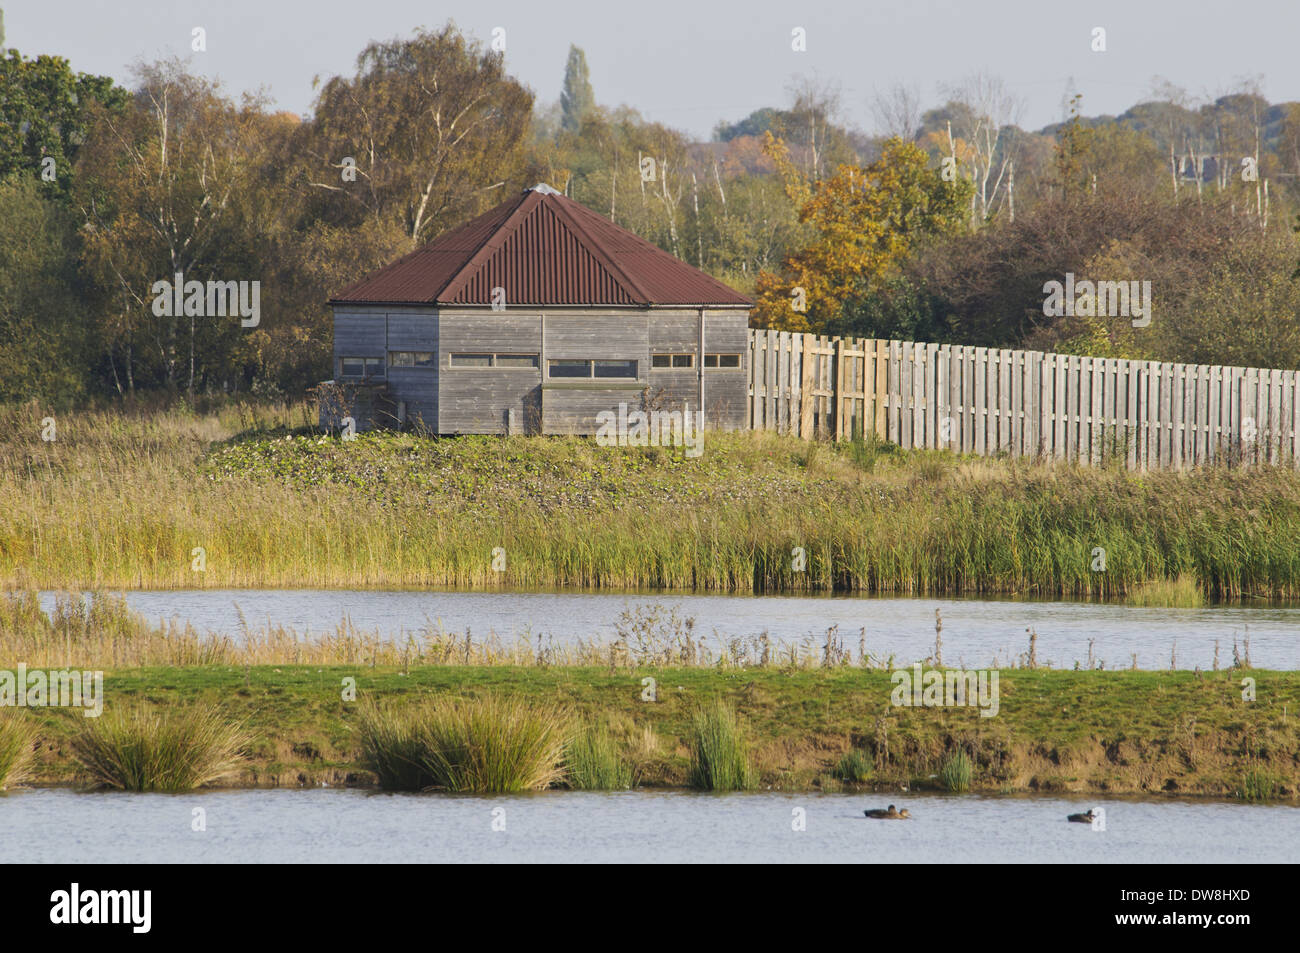 Birdwatching hide overlooking reedbed and wetland habitat Potteric Carr Nature Reserve South Yorkshire England October Stock Photo